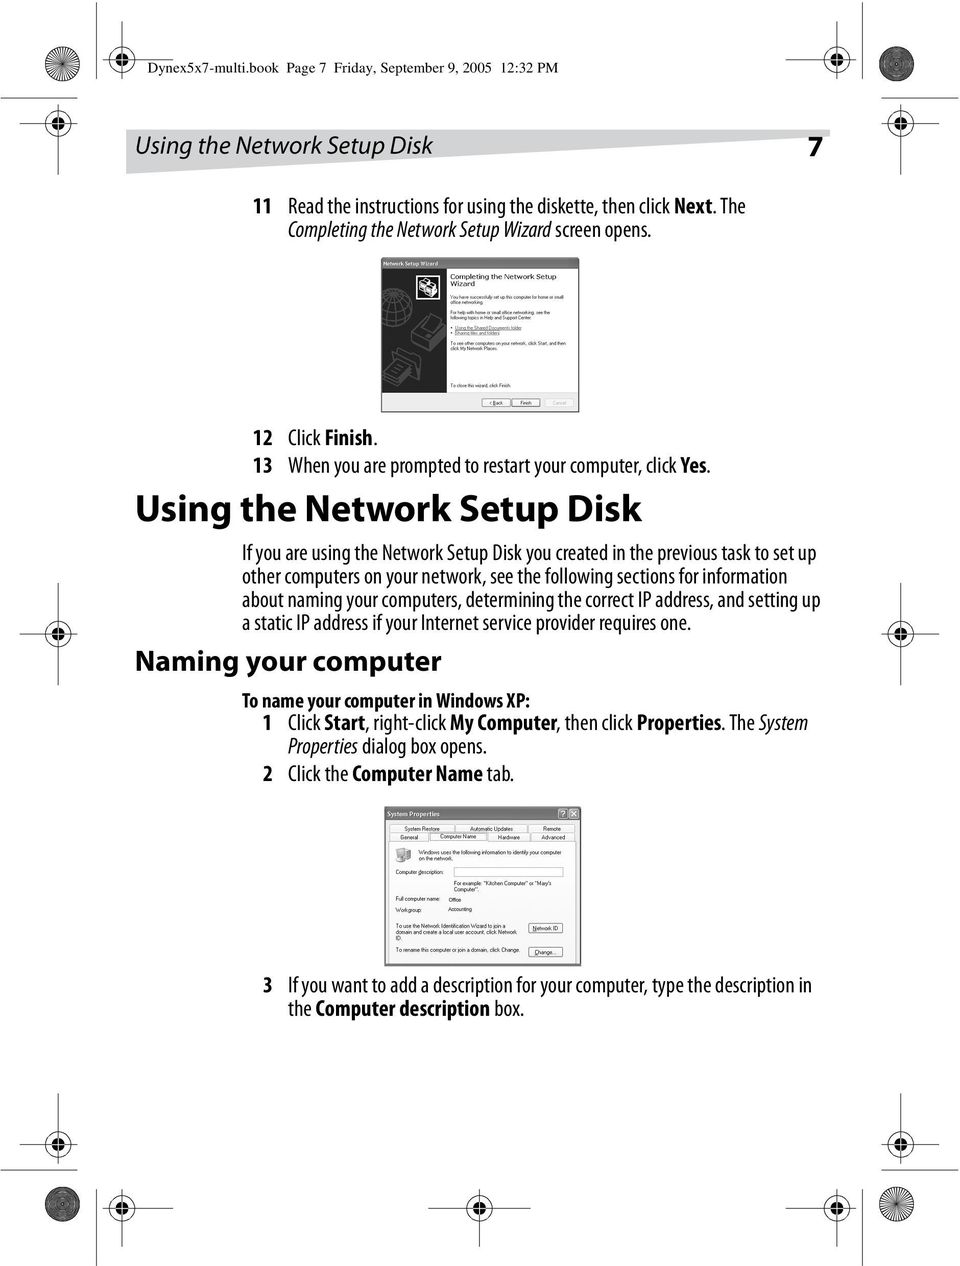 Using the Network Setup Disk If you are using the Network Setup Disk you created in the previous task to set up other computers on your network, see the following sections for information about